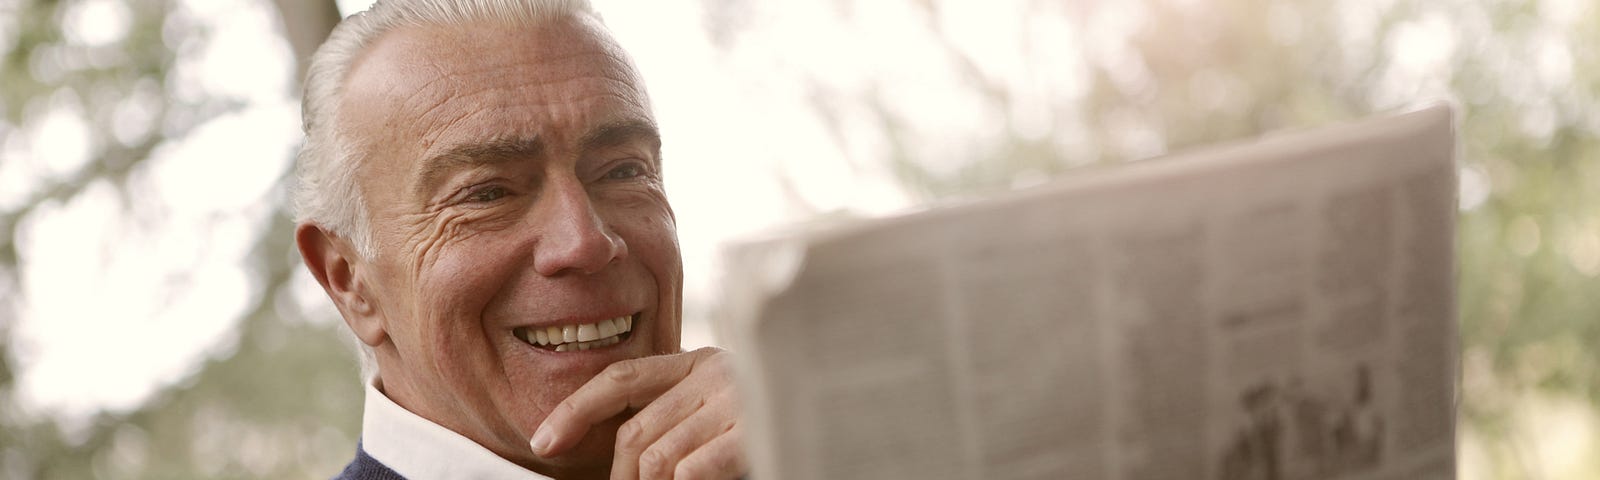 Man with white hair smiling while reading the newspaper.